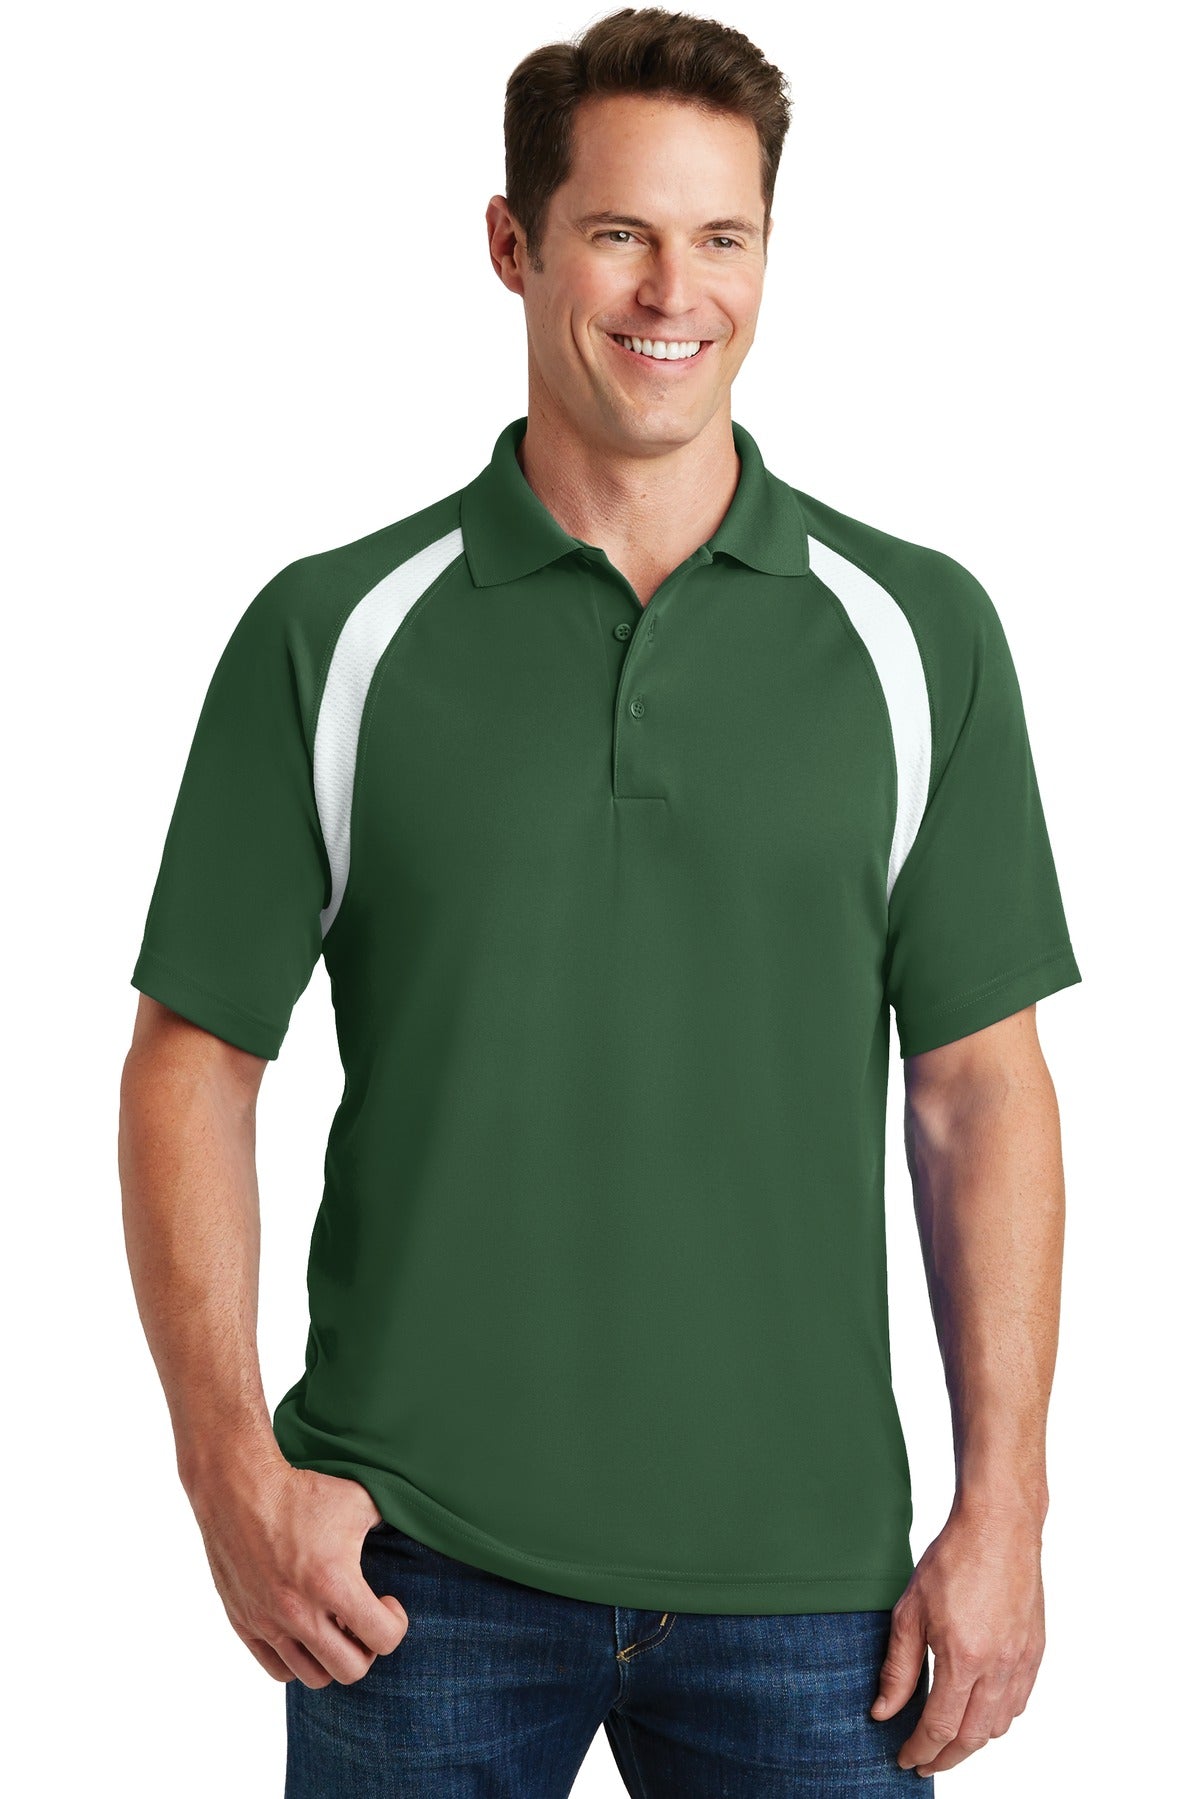 Photo of Sport-Tek Polos/Knits T476  color  Forest Green/ White